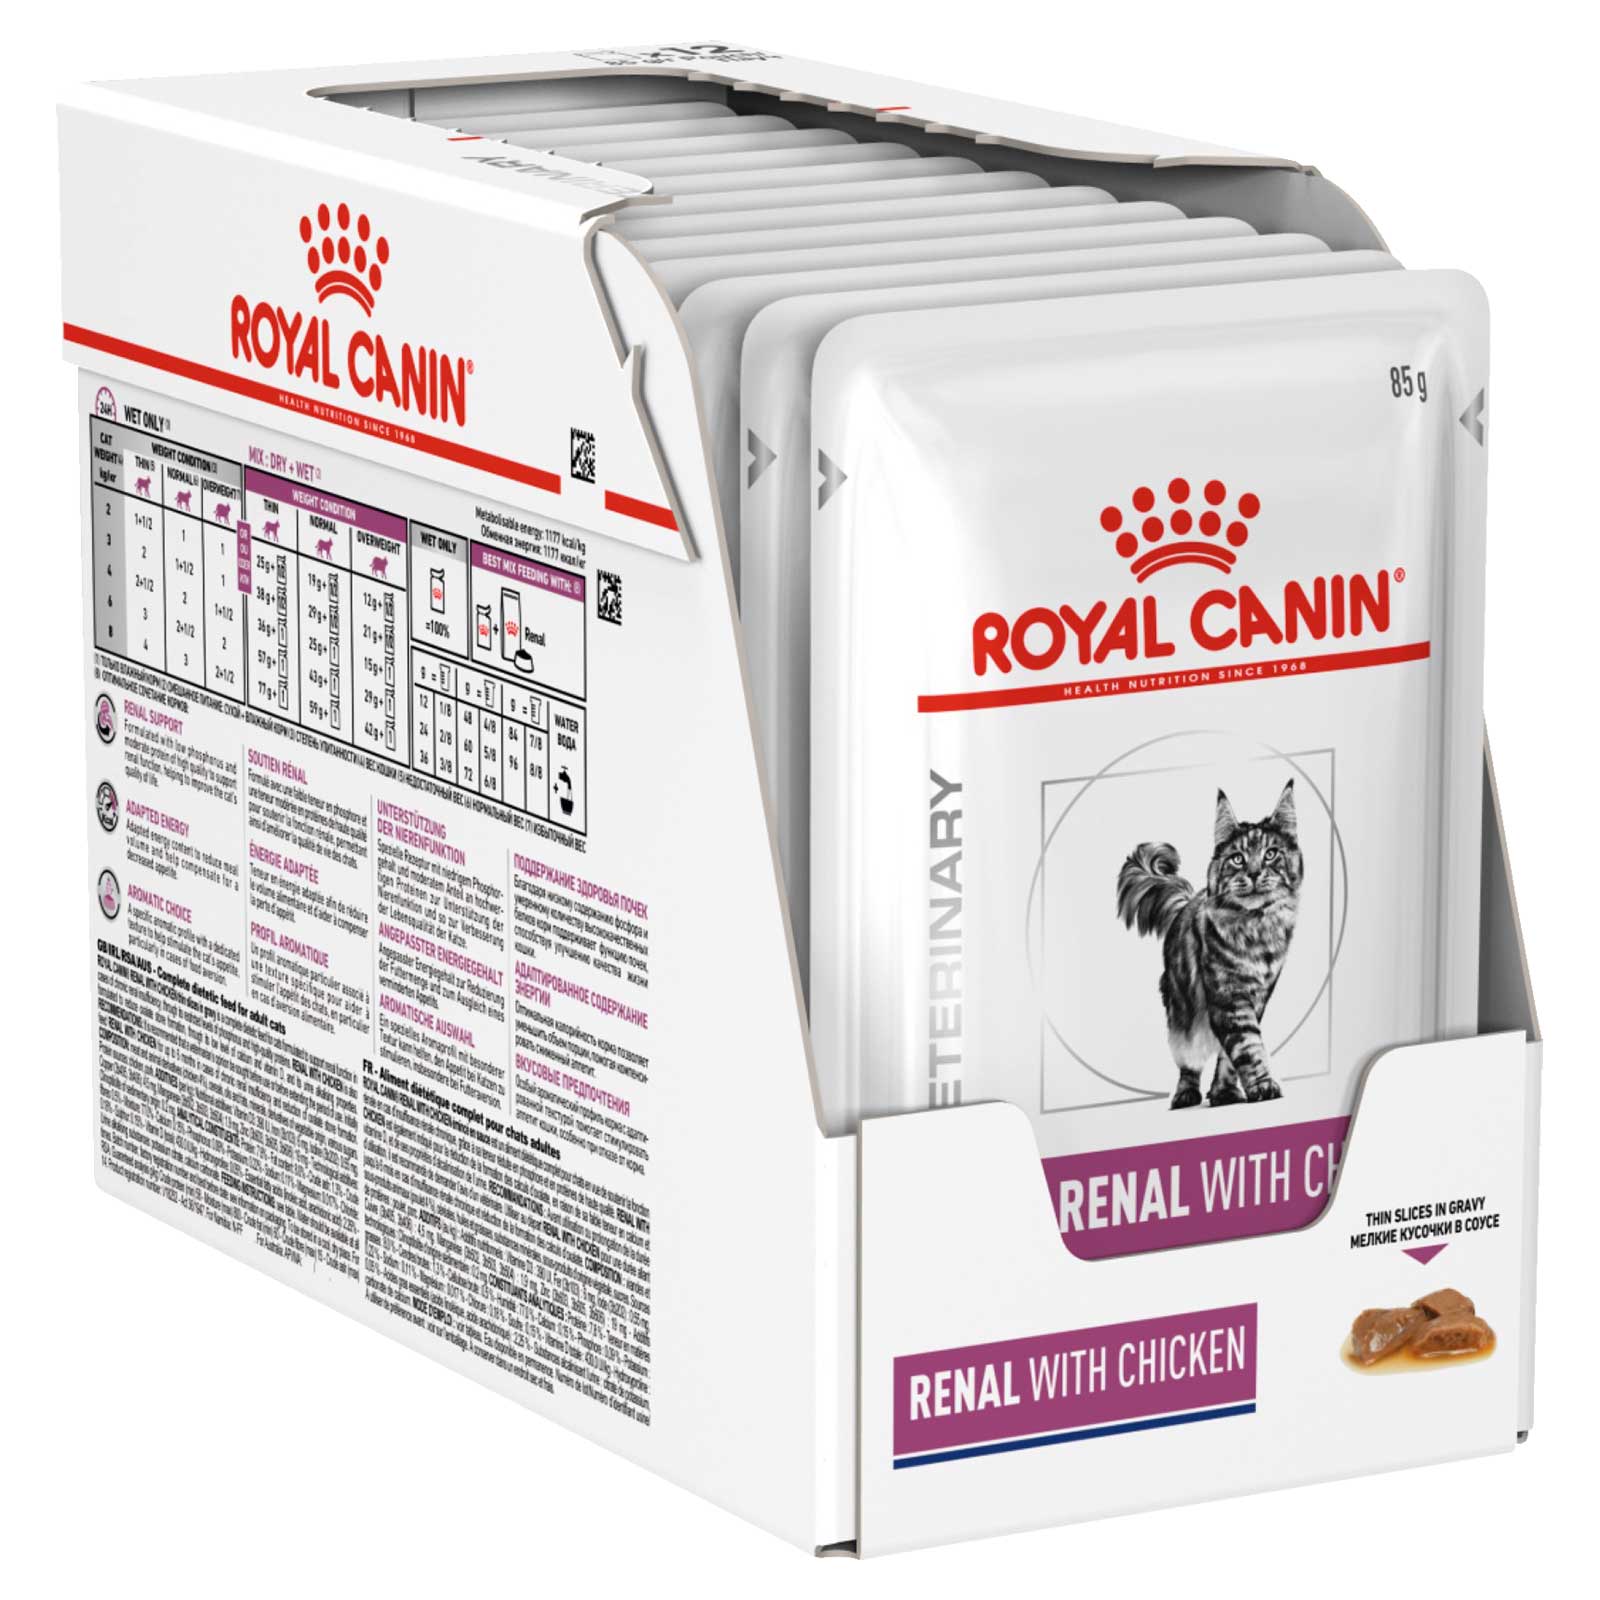 Royal Canin Veterinary Cat Food Pouch Renal with Chicken